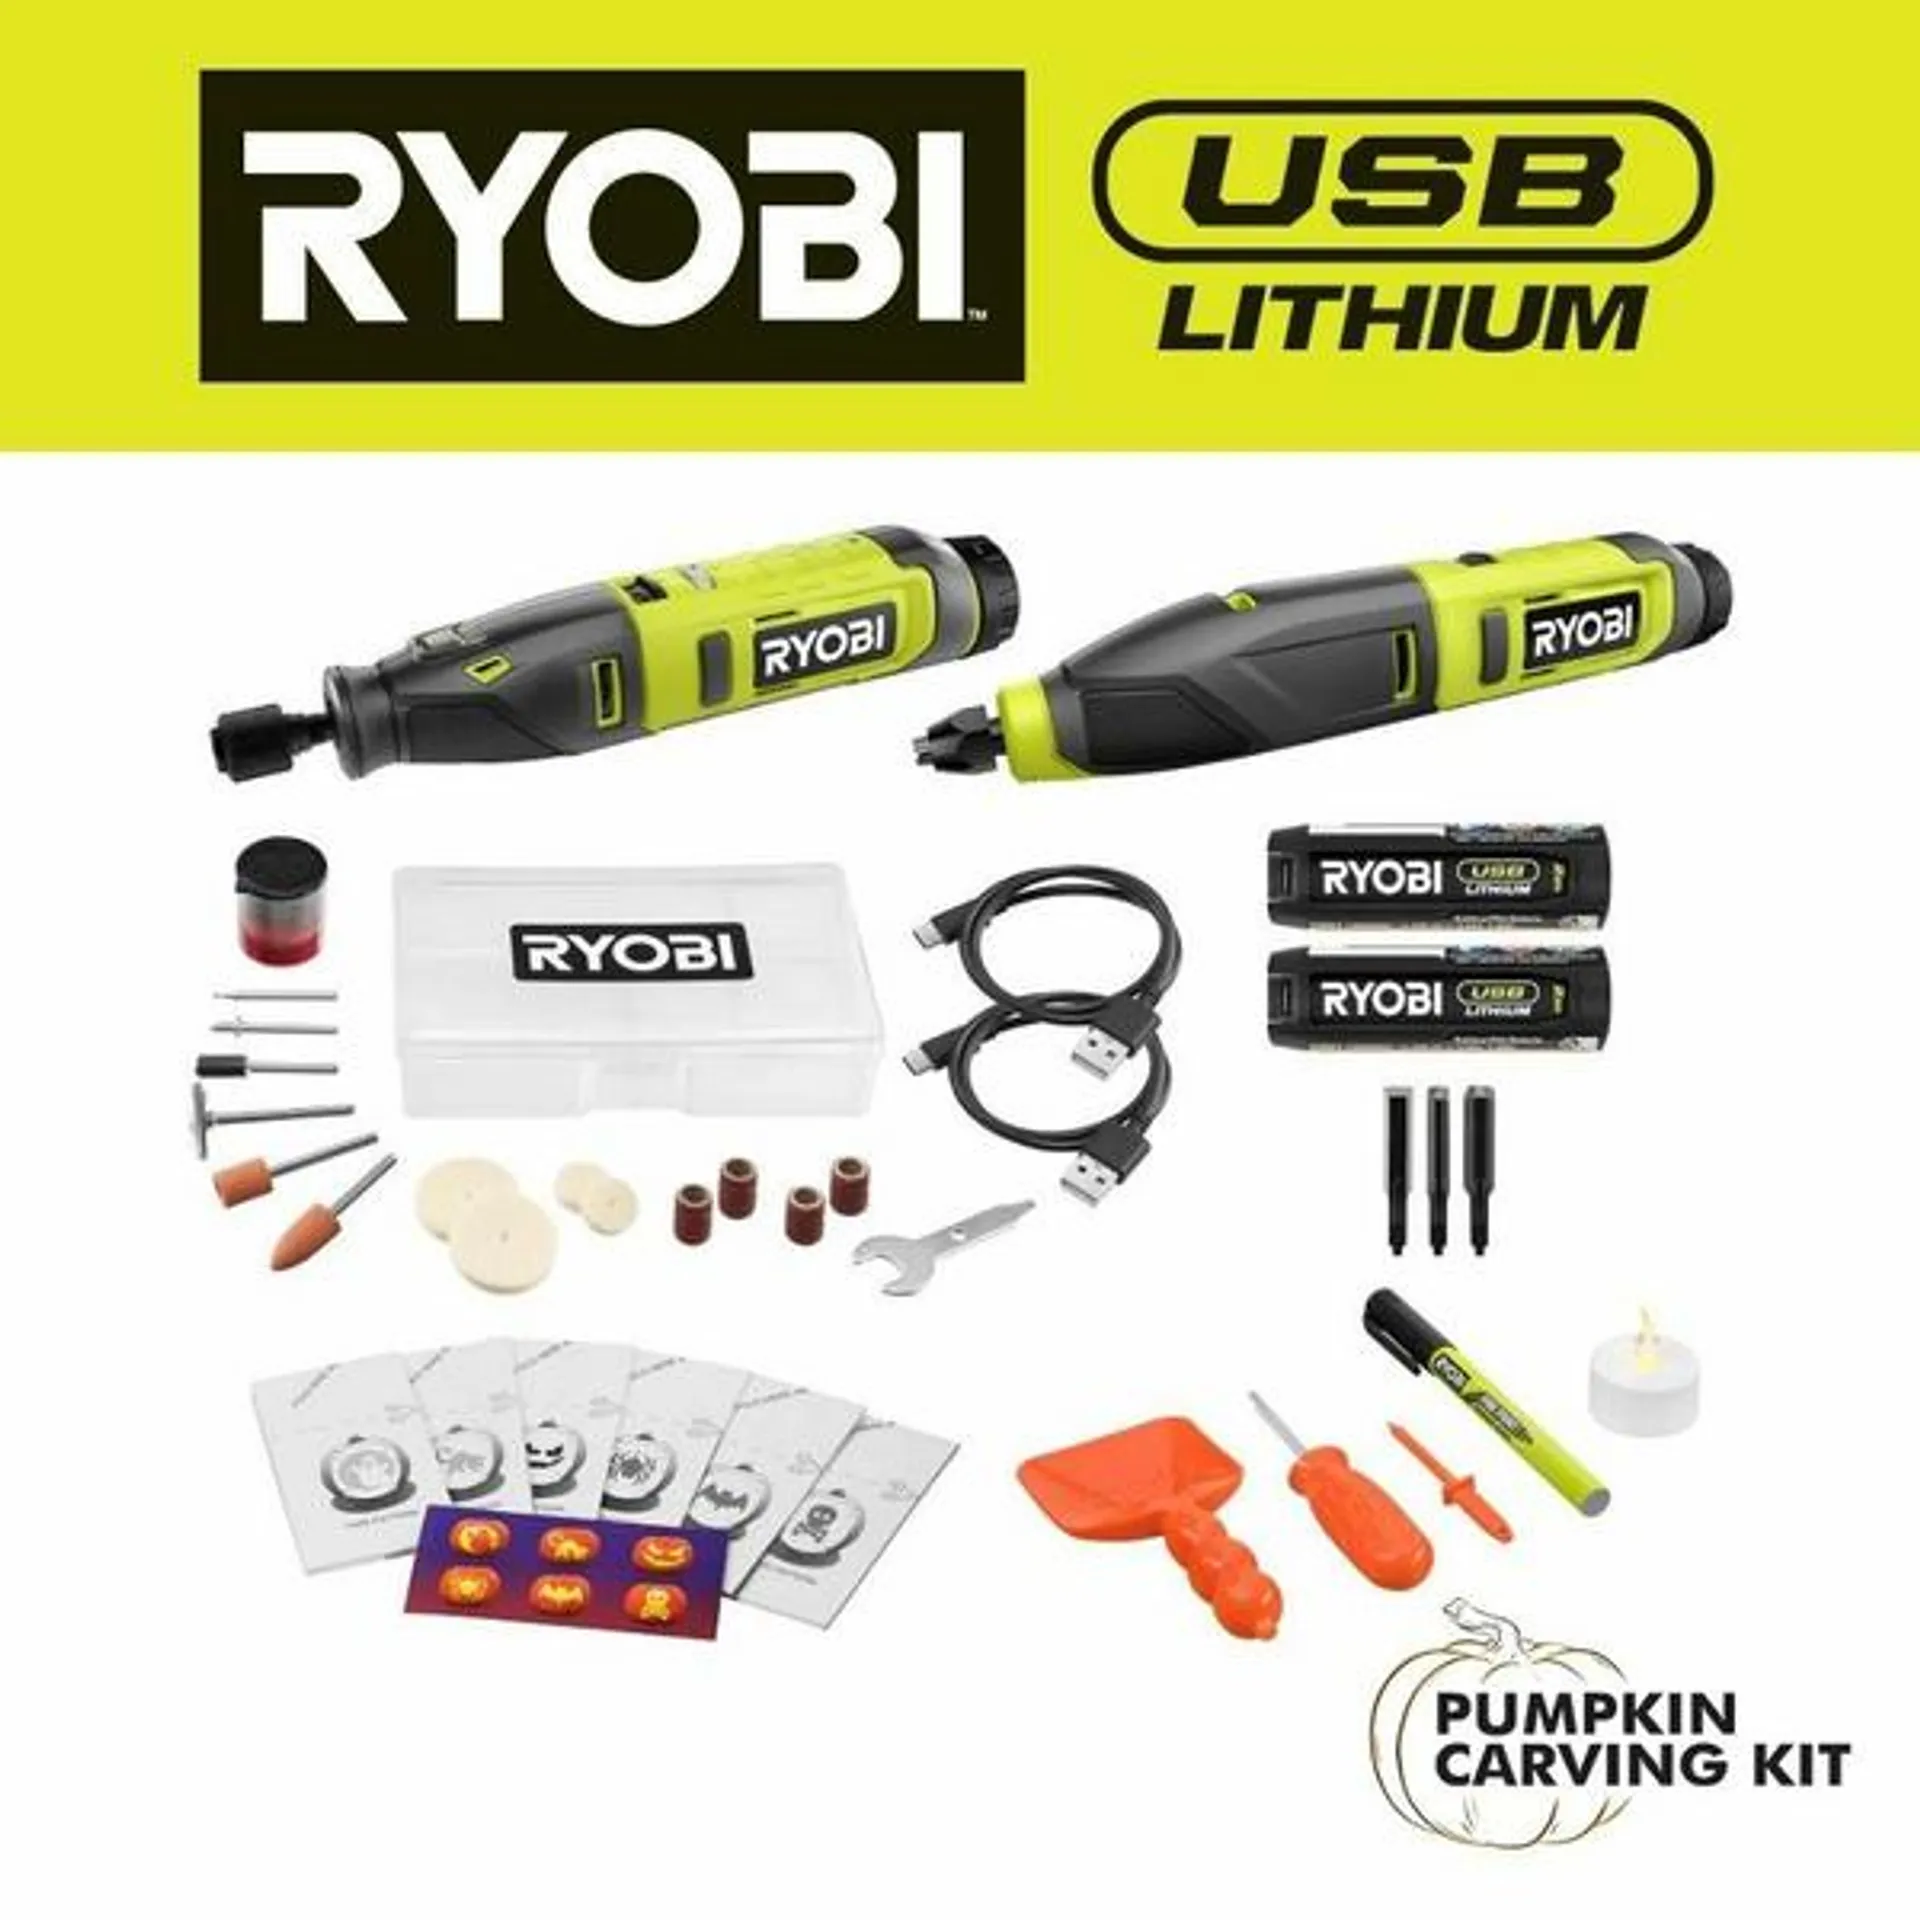 USB LITHIUM 2-TOOL COMBO KIT WITH PUMPKIN CARVING TOOLS